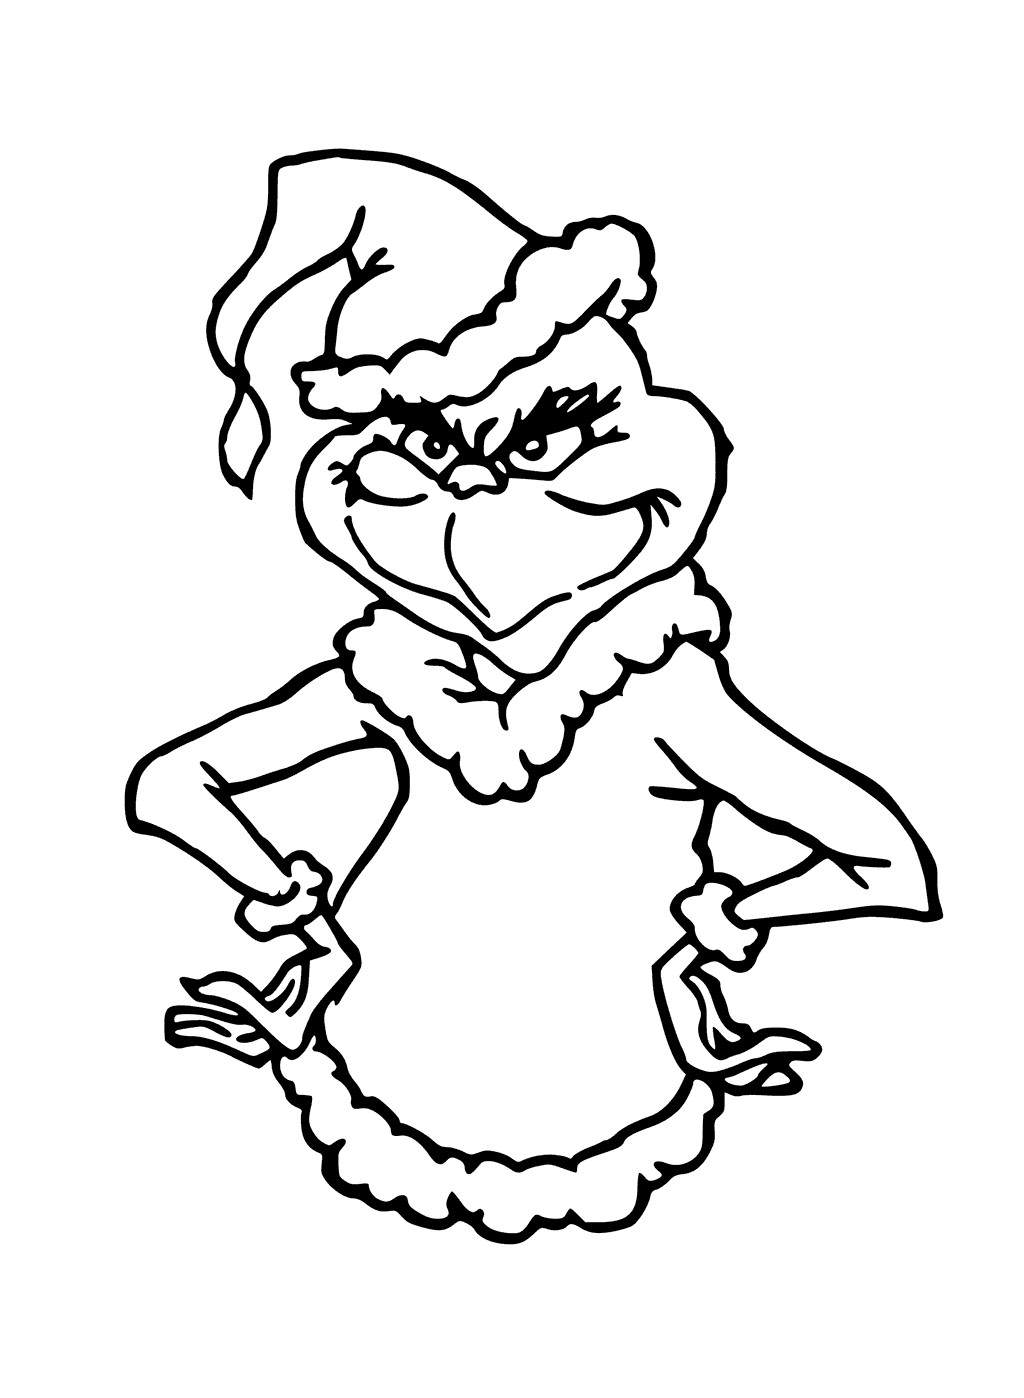 Grinch Coloring Pages Free Black and White Free Printable Coloring Pages